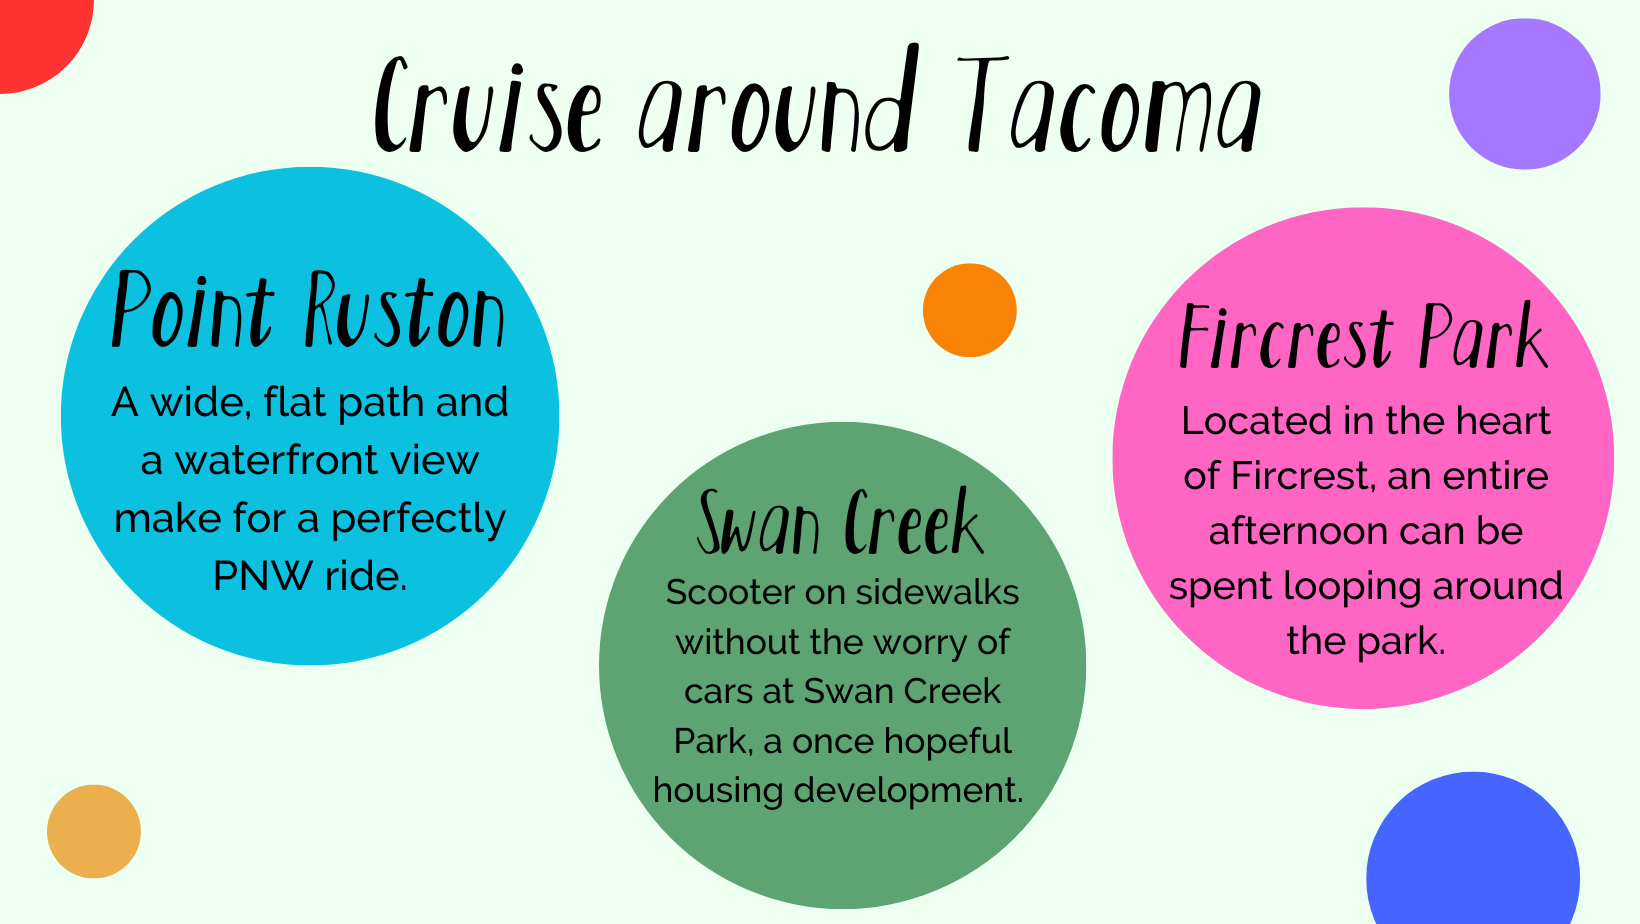 "Cruise around Tacoma." The list of parks is Point Ruston, Swan Creek Park, and Fircrest Park. 